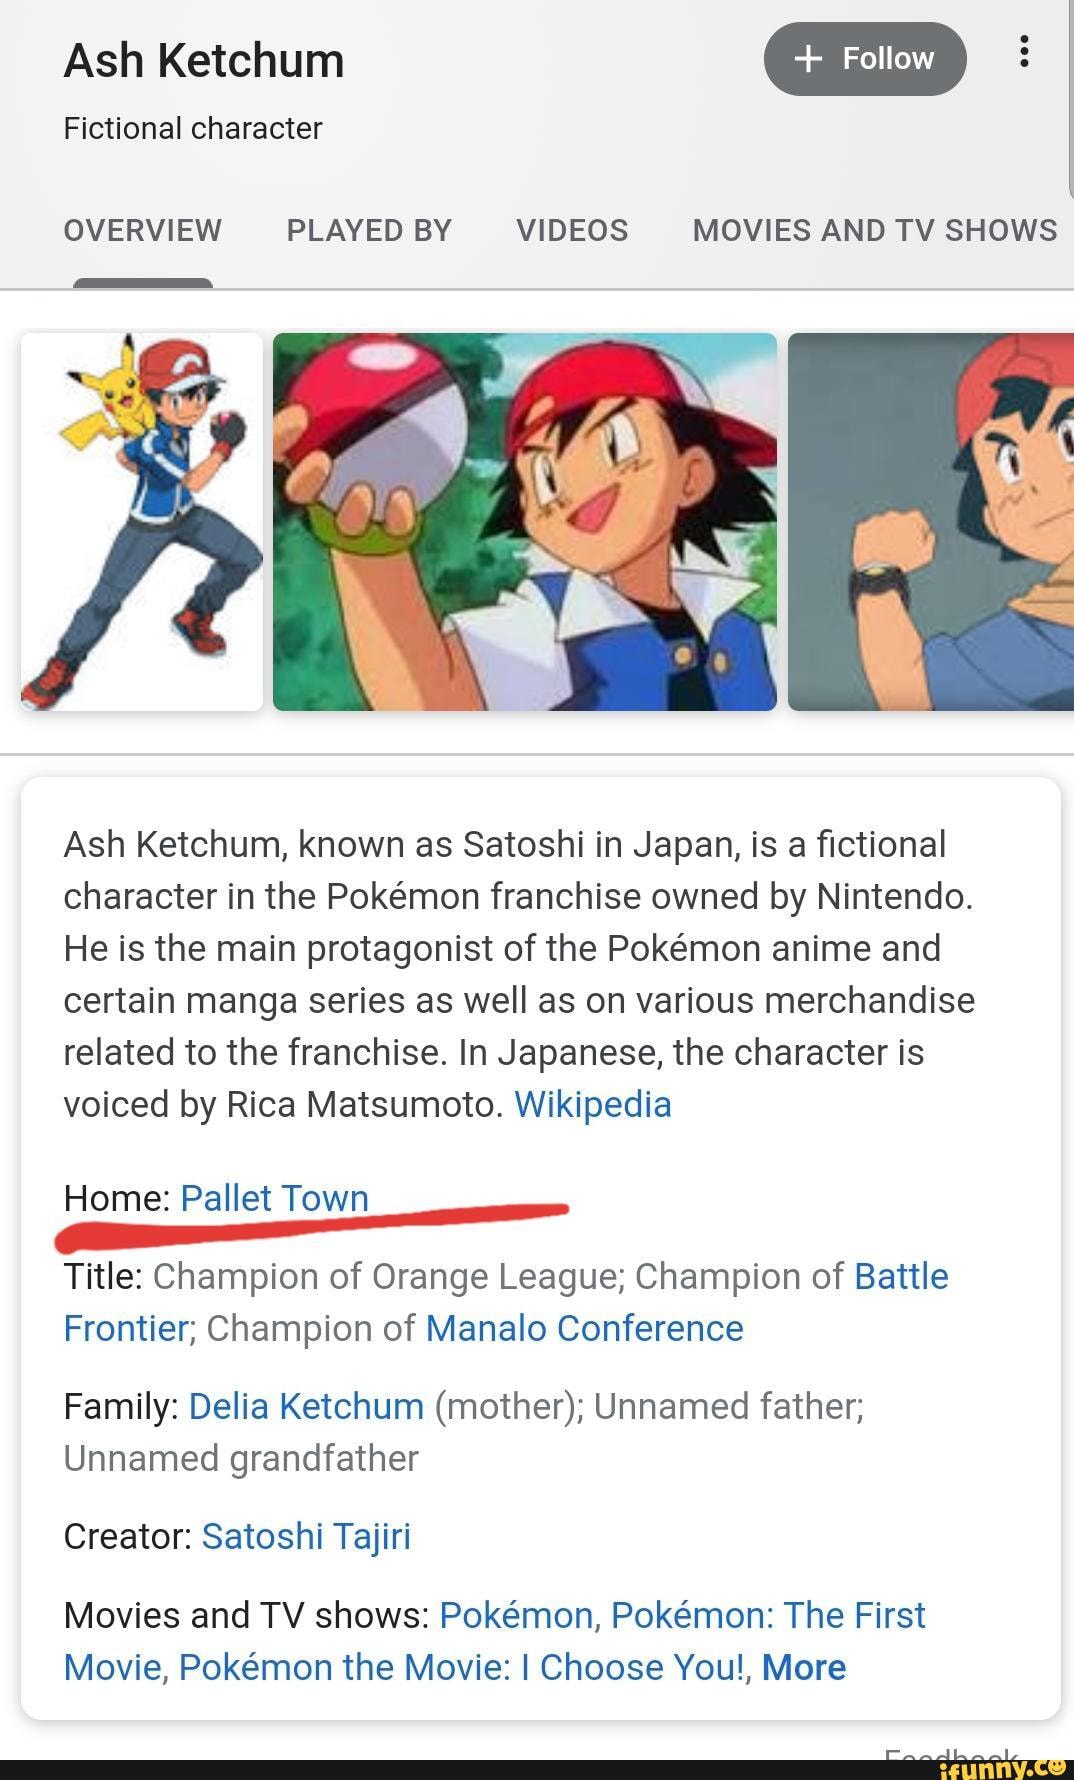 Ash Ketchum E Ash Ketchum Known As Satoshi In Japan Is A ﬁctional Character In The